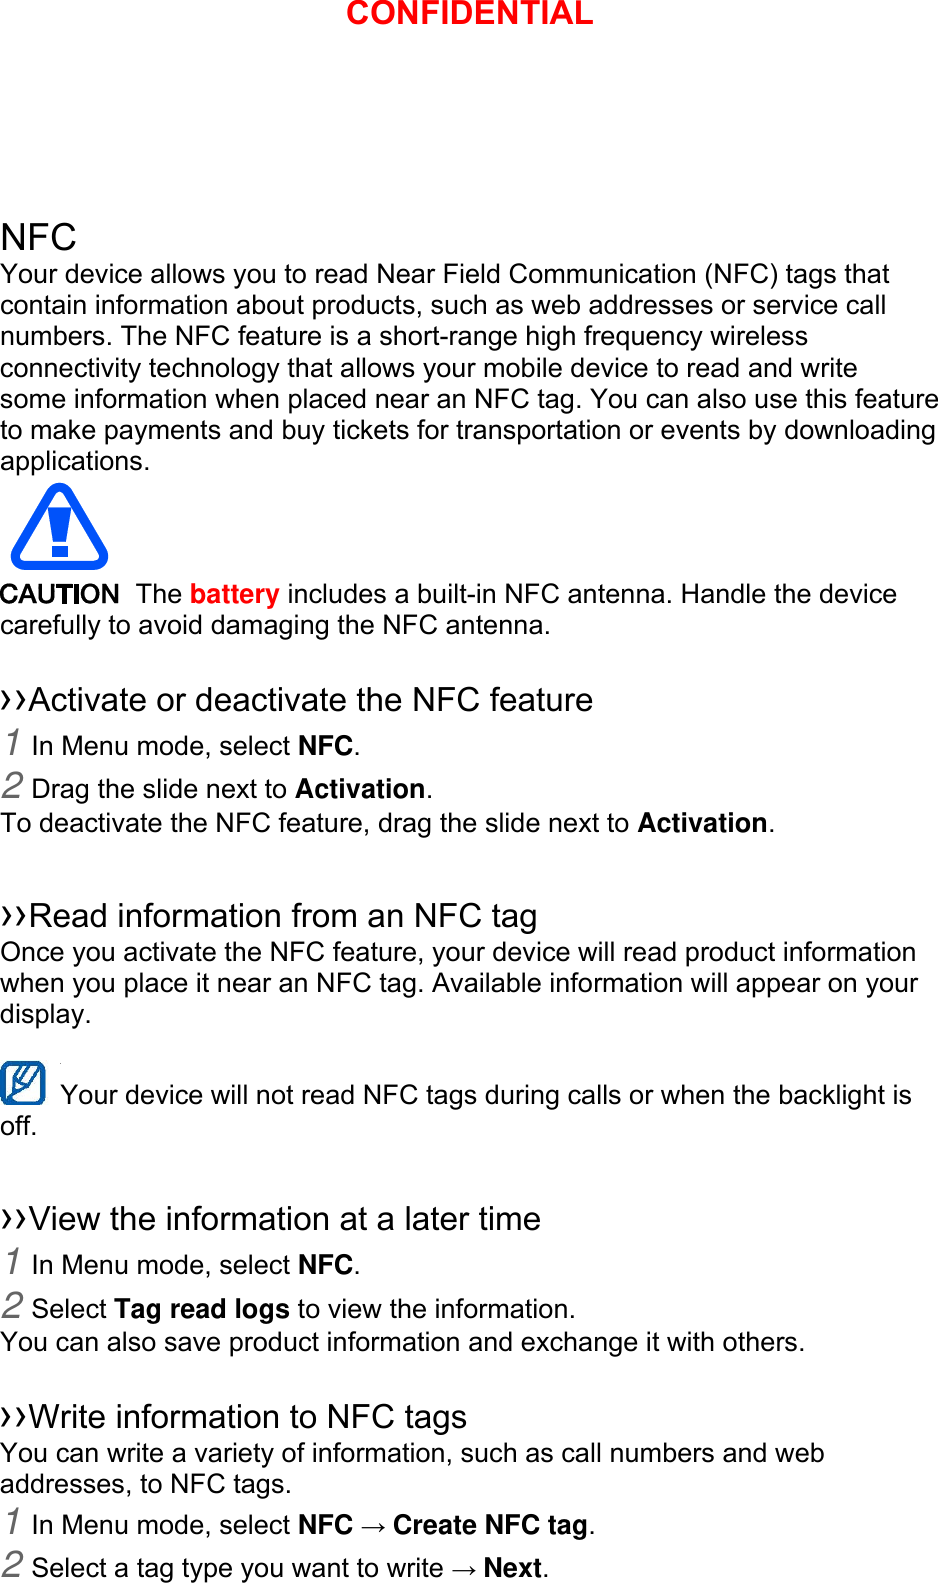   NFC Your device allows you to read Near Field Communication (NFC) tags that contain information about products, such as web addresses or service call numbers. The NFC feature is a short-range high frequency wireless connectivity technology that allows your mobile device to read and write some information when placed near an NFC tag. You can also use this feature to make payments and buy tickets for transportation or events by downloading applications.   The battery includes a built-in NFC antenna. Handle the device carefully to avoid damaging the NFC antenna.  ››Activate or deactivate the NFC feature 1 In Menu mode, select NFC. 2 Drag the slide next to Activation. To deactivate the NFC feature, drag the slide next to Activation.  ››Read information from an NFC tag Once you activate the NFC feature, your device will read product information when you place it near an NFC tag. Available information will appear on your display.  Your device will not read NFC tags during calls or when the backlight is   off.  ››View the information at a later time 1 In Menu mode, select NFC. 2 Select Tag read logs to view the information. You can also save product information and exchange it with others.  ››Write information to NFC tags   You can write a variety of information, such as call numbers and web addresses, to NFC tags. 1 In Menu mode, select NFC → Create NFC tag. 2 Select a tag type you want to write → Next. CONFIDENTIAL